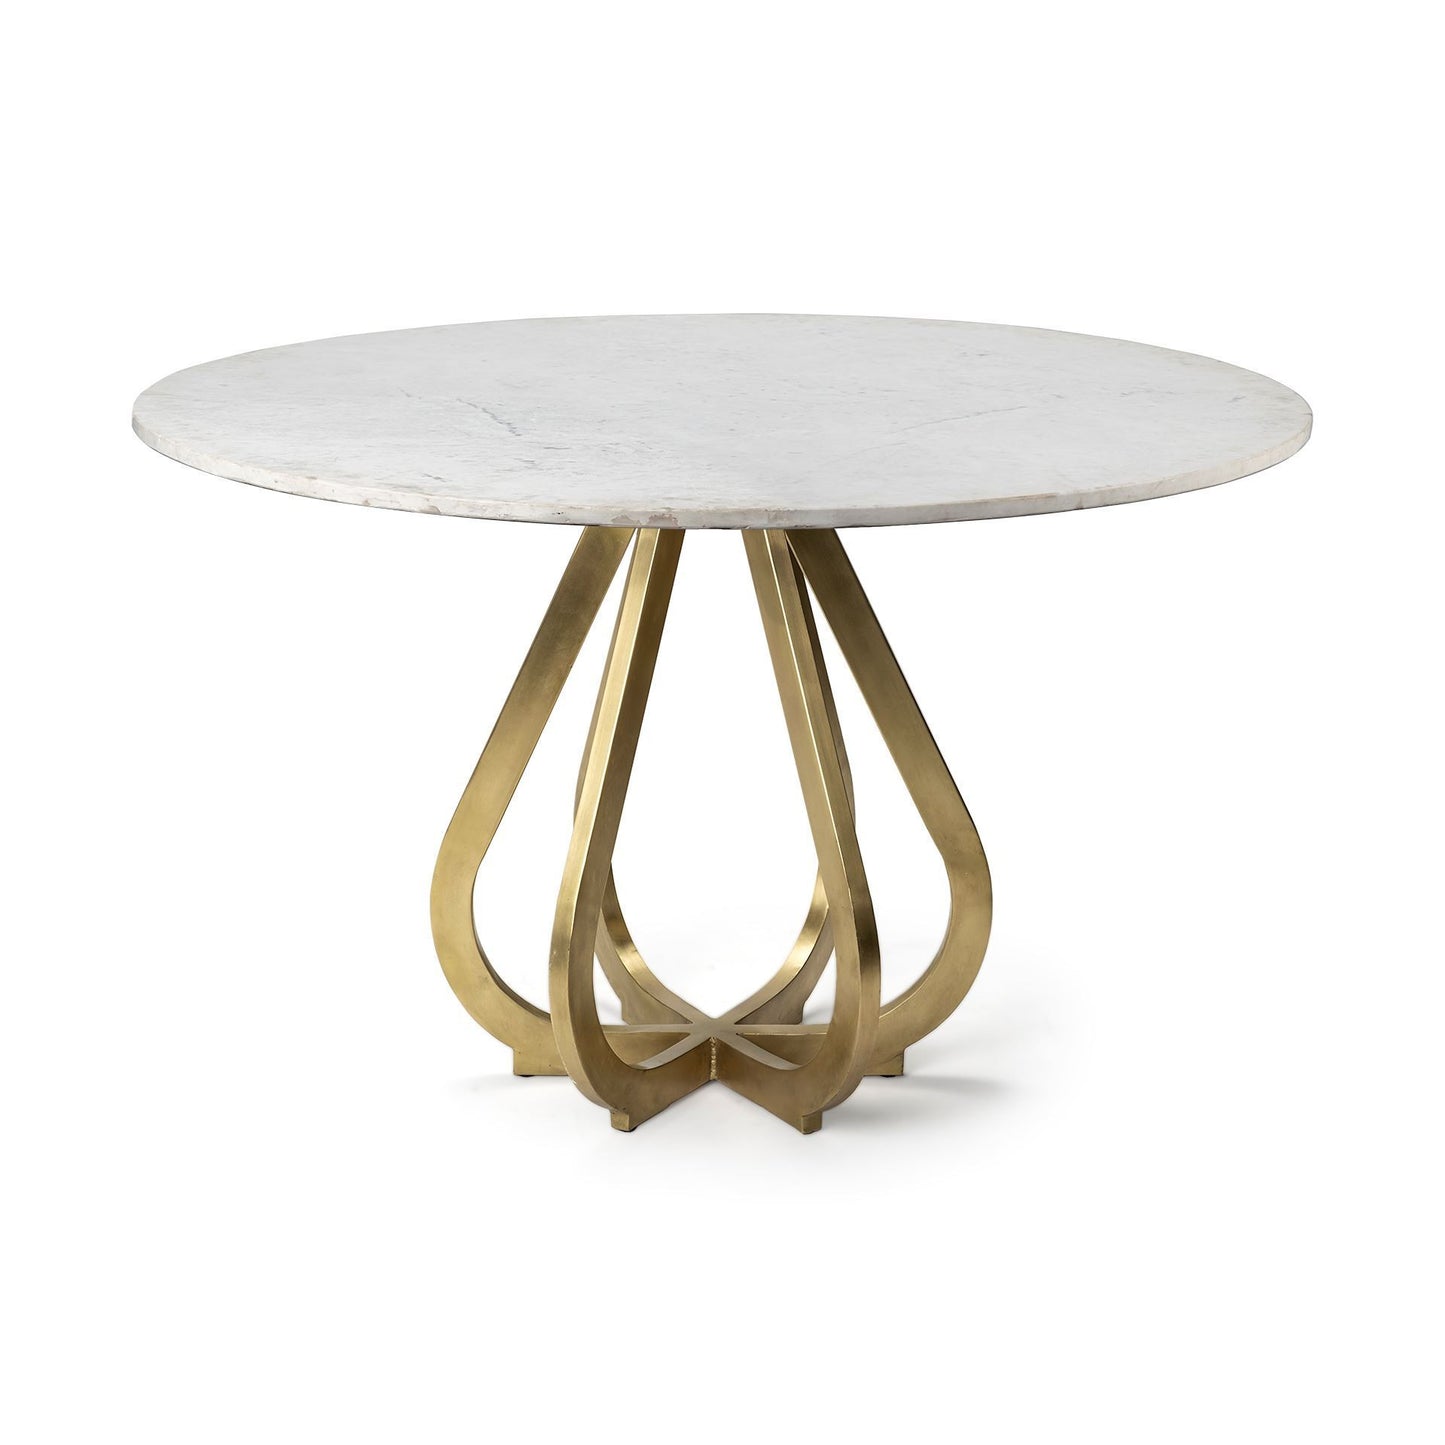 48" Round White Marble Top With Gold Iron Base